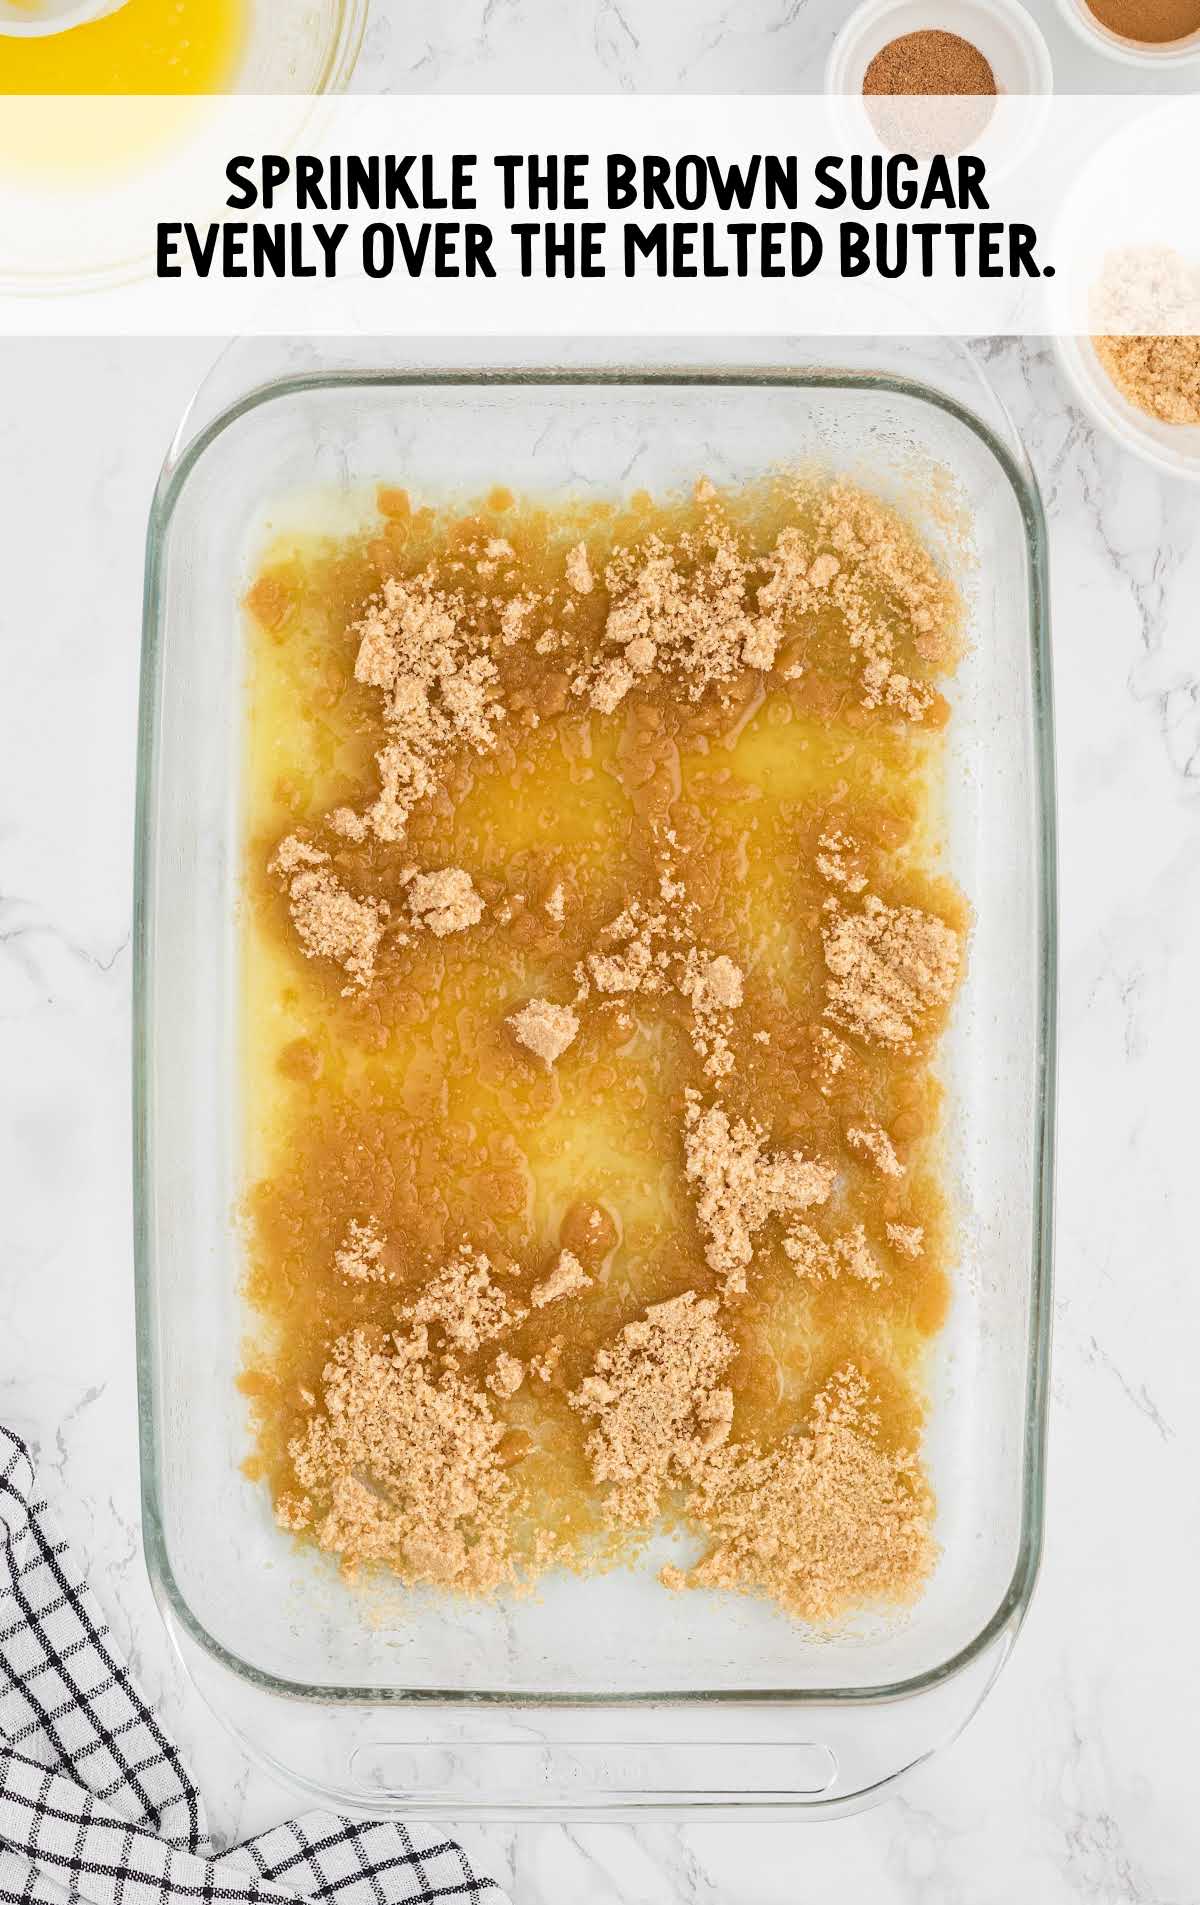 brown sugar sprinkled over the melted butter in a baking dish